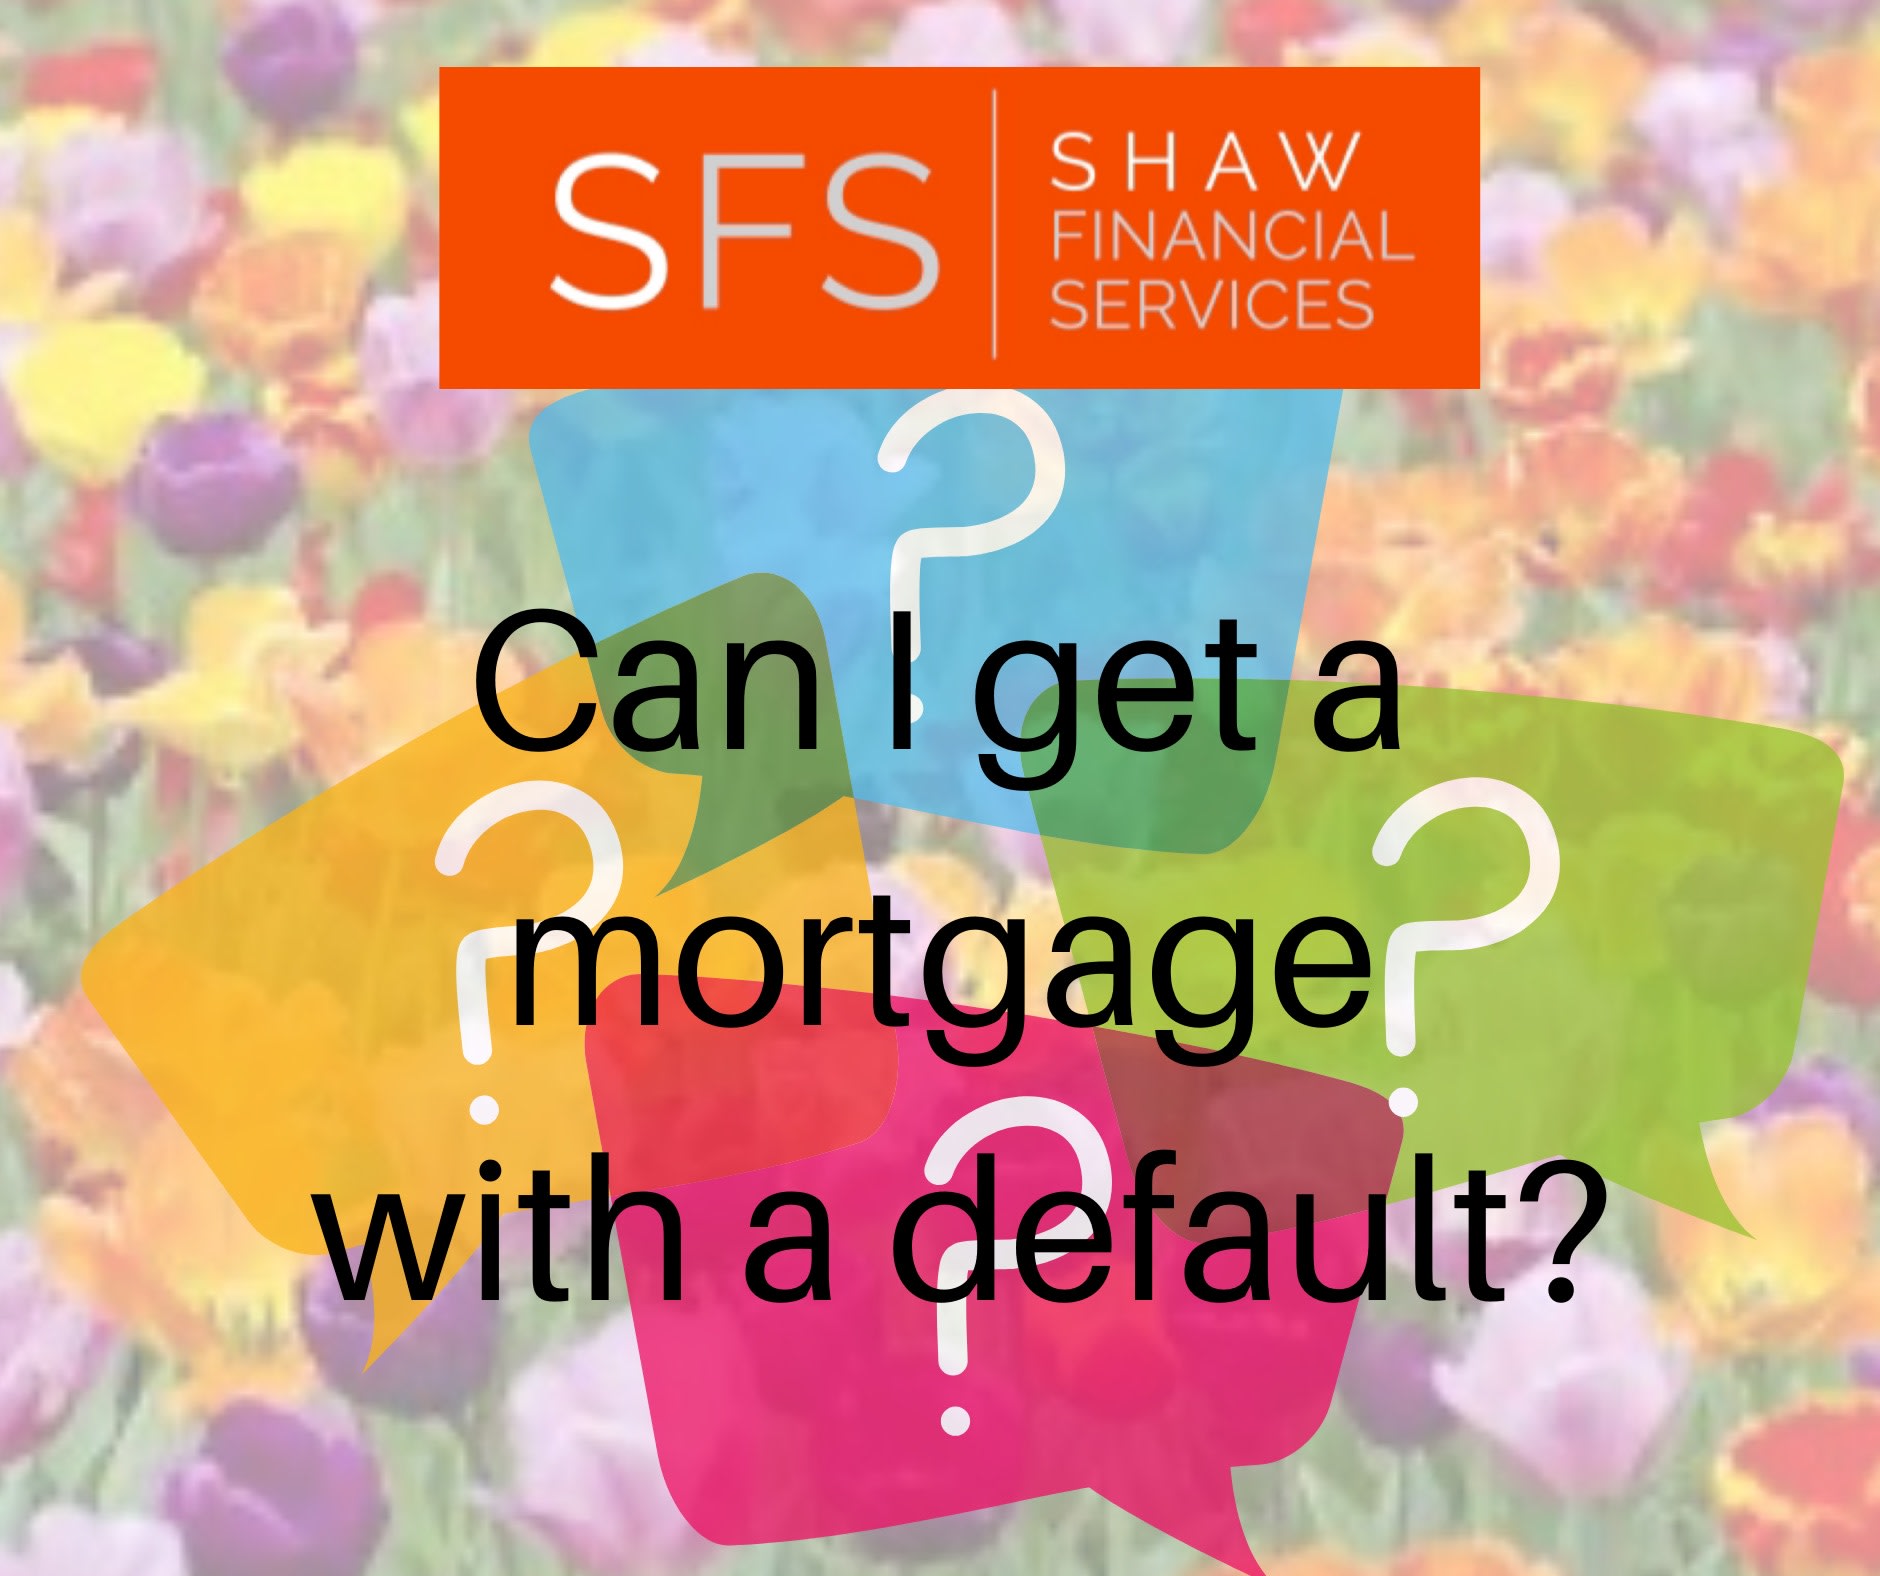 Shaw Financial Services Mansfield 01623 375007